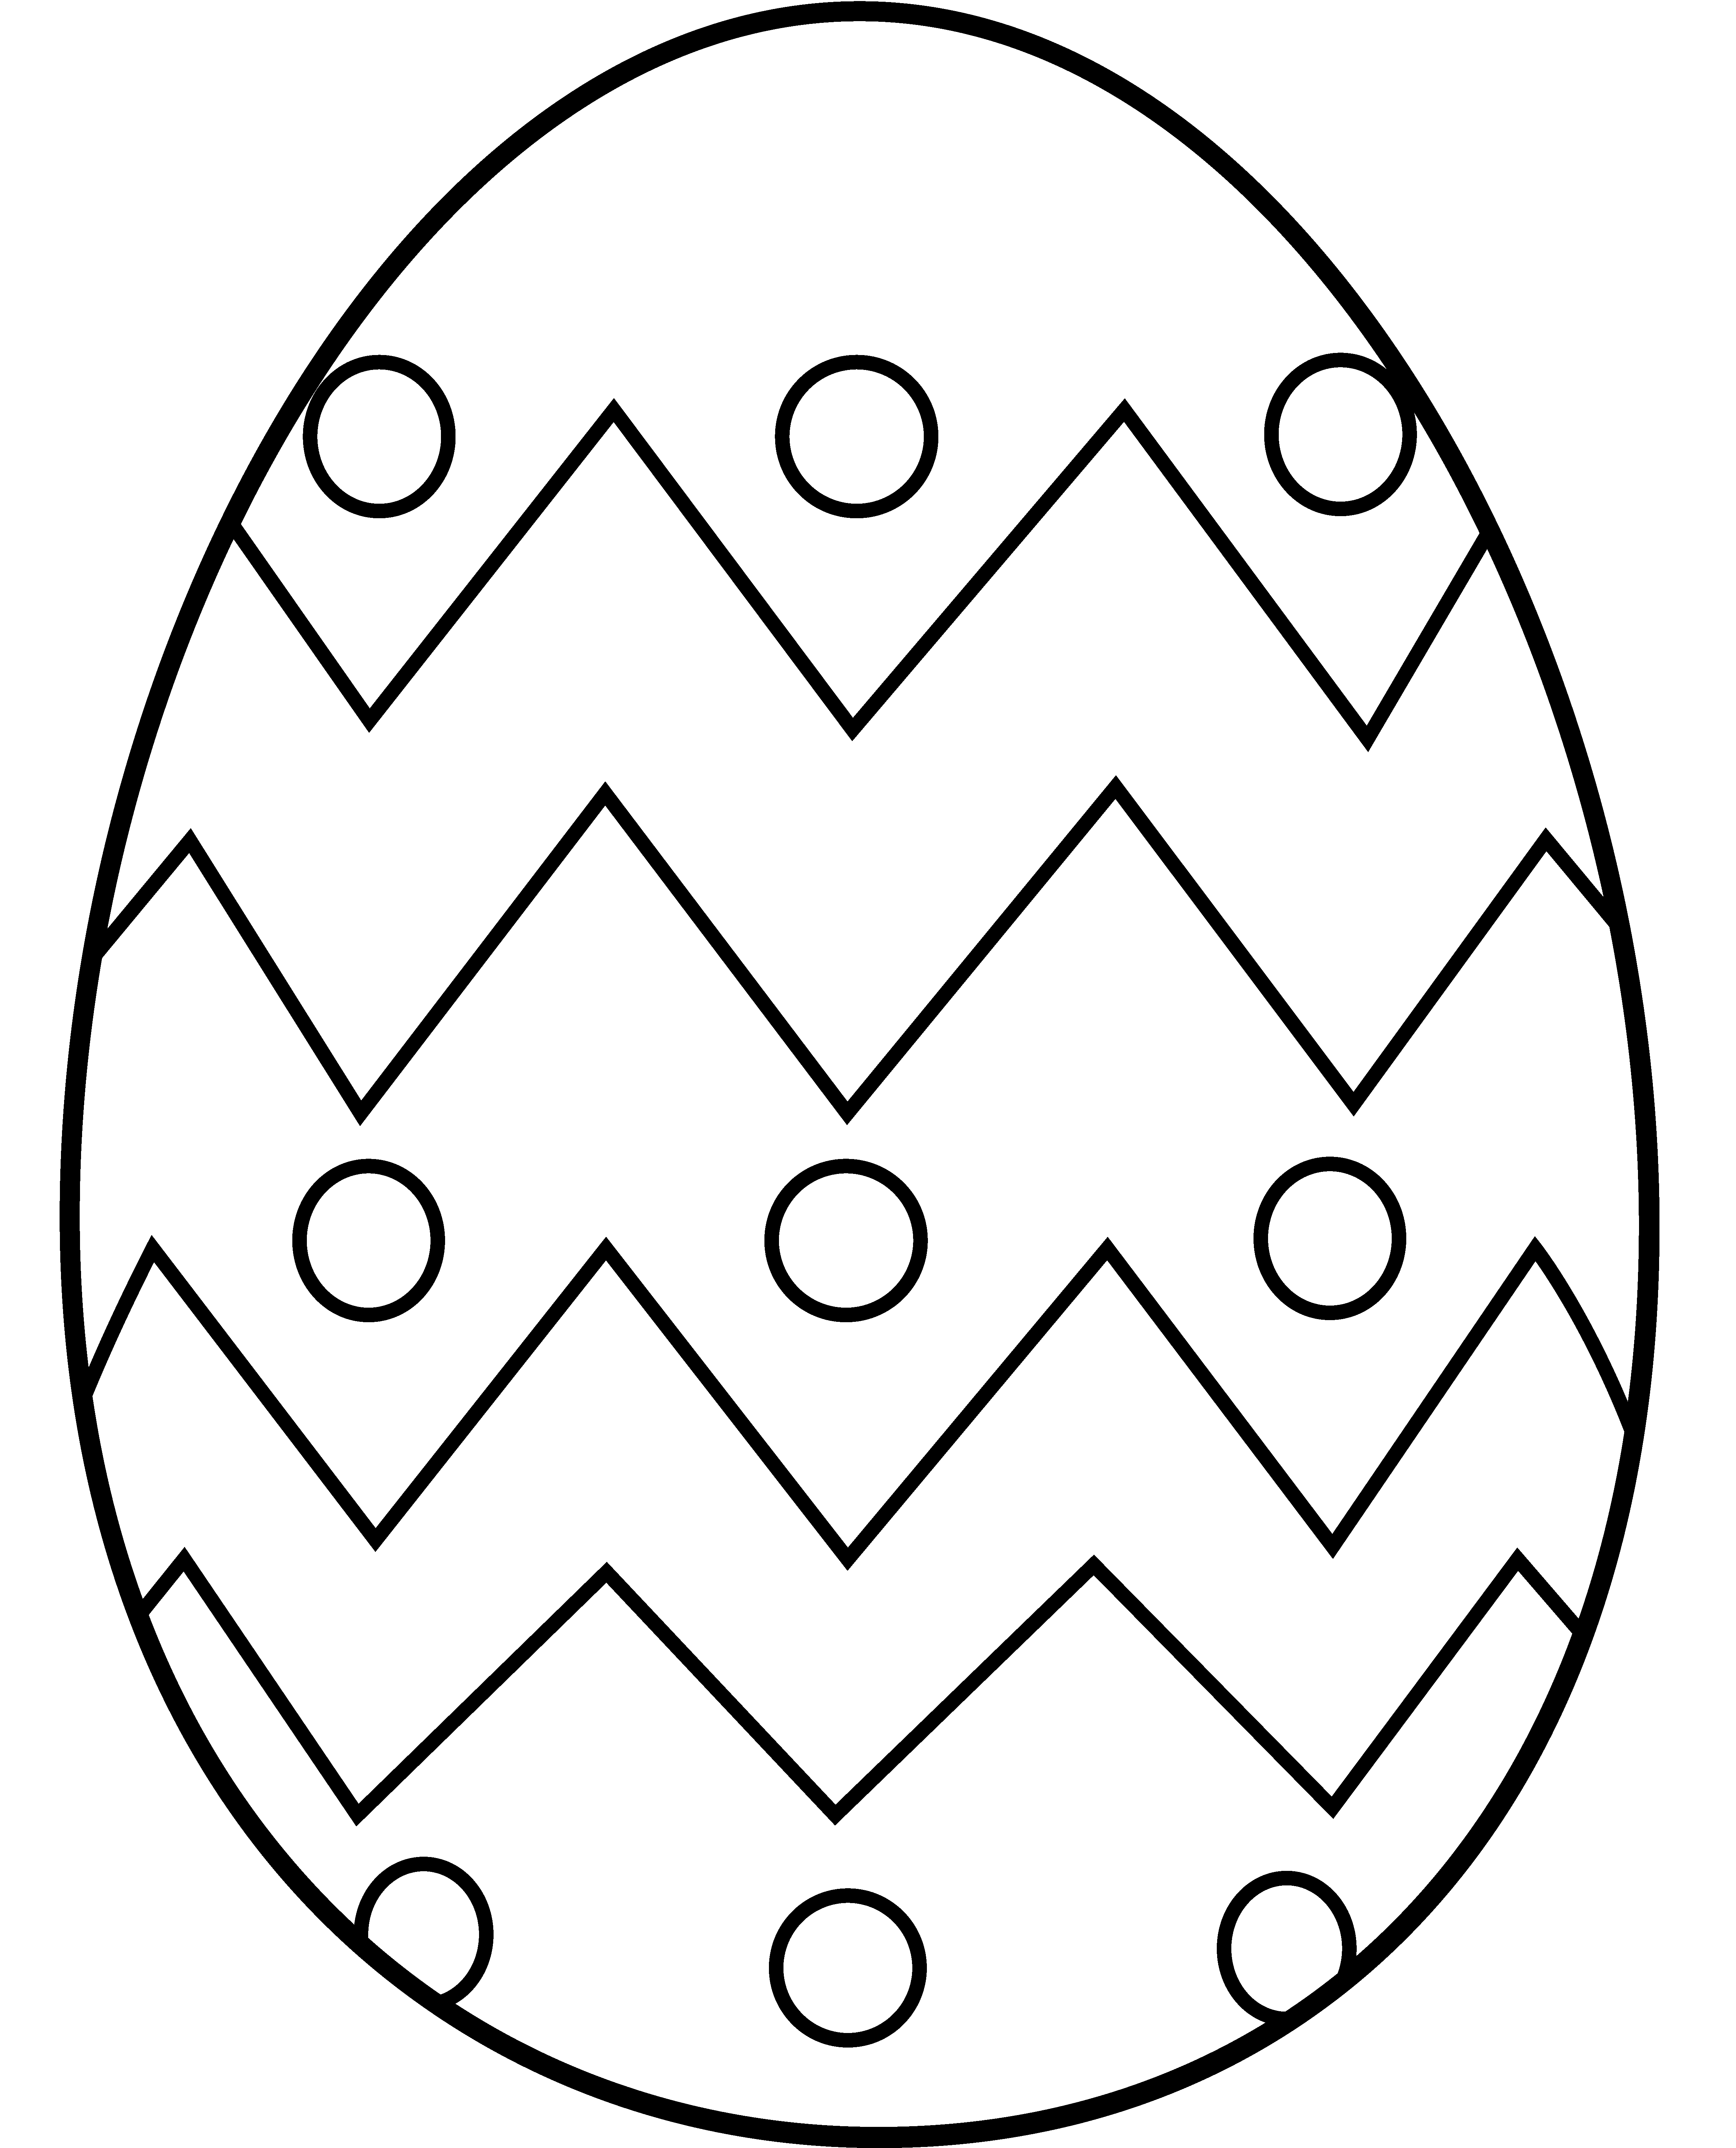 Easter Egg clip art free coloring pages | Coloring Pages